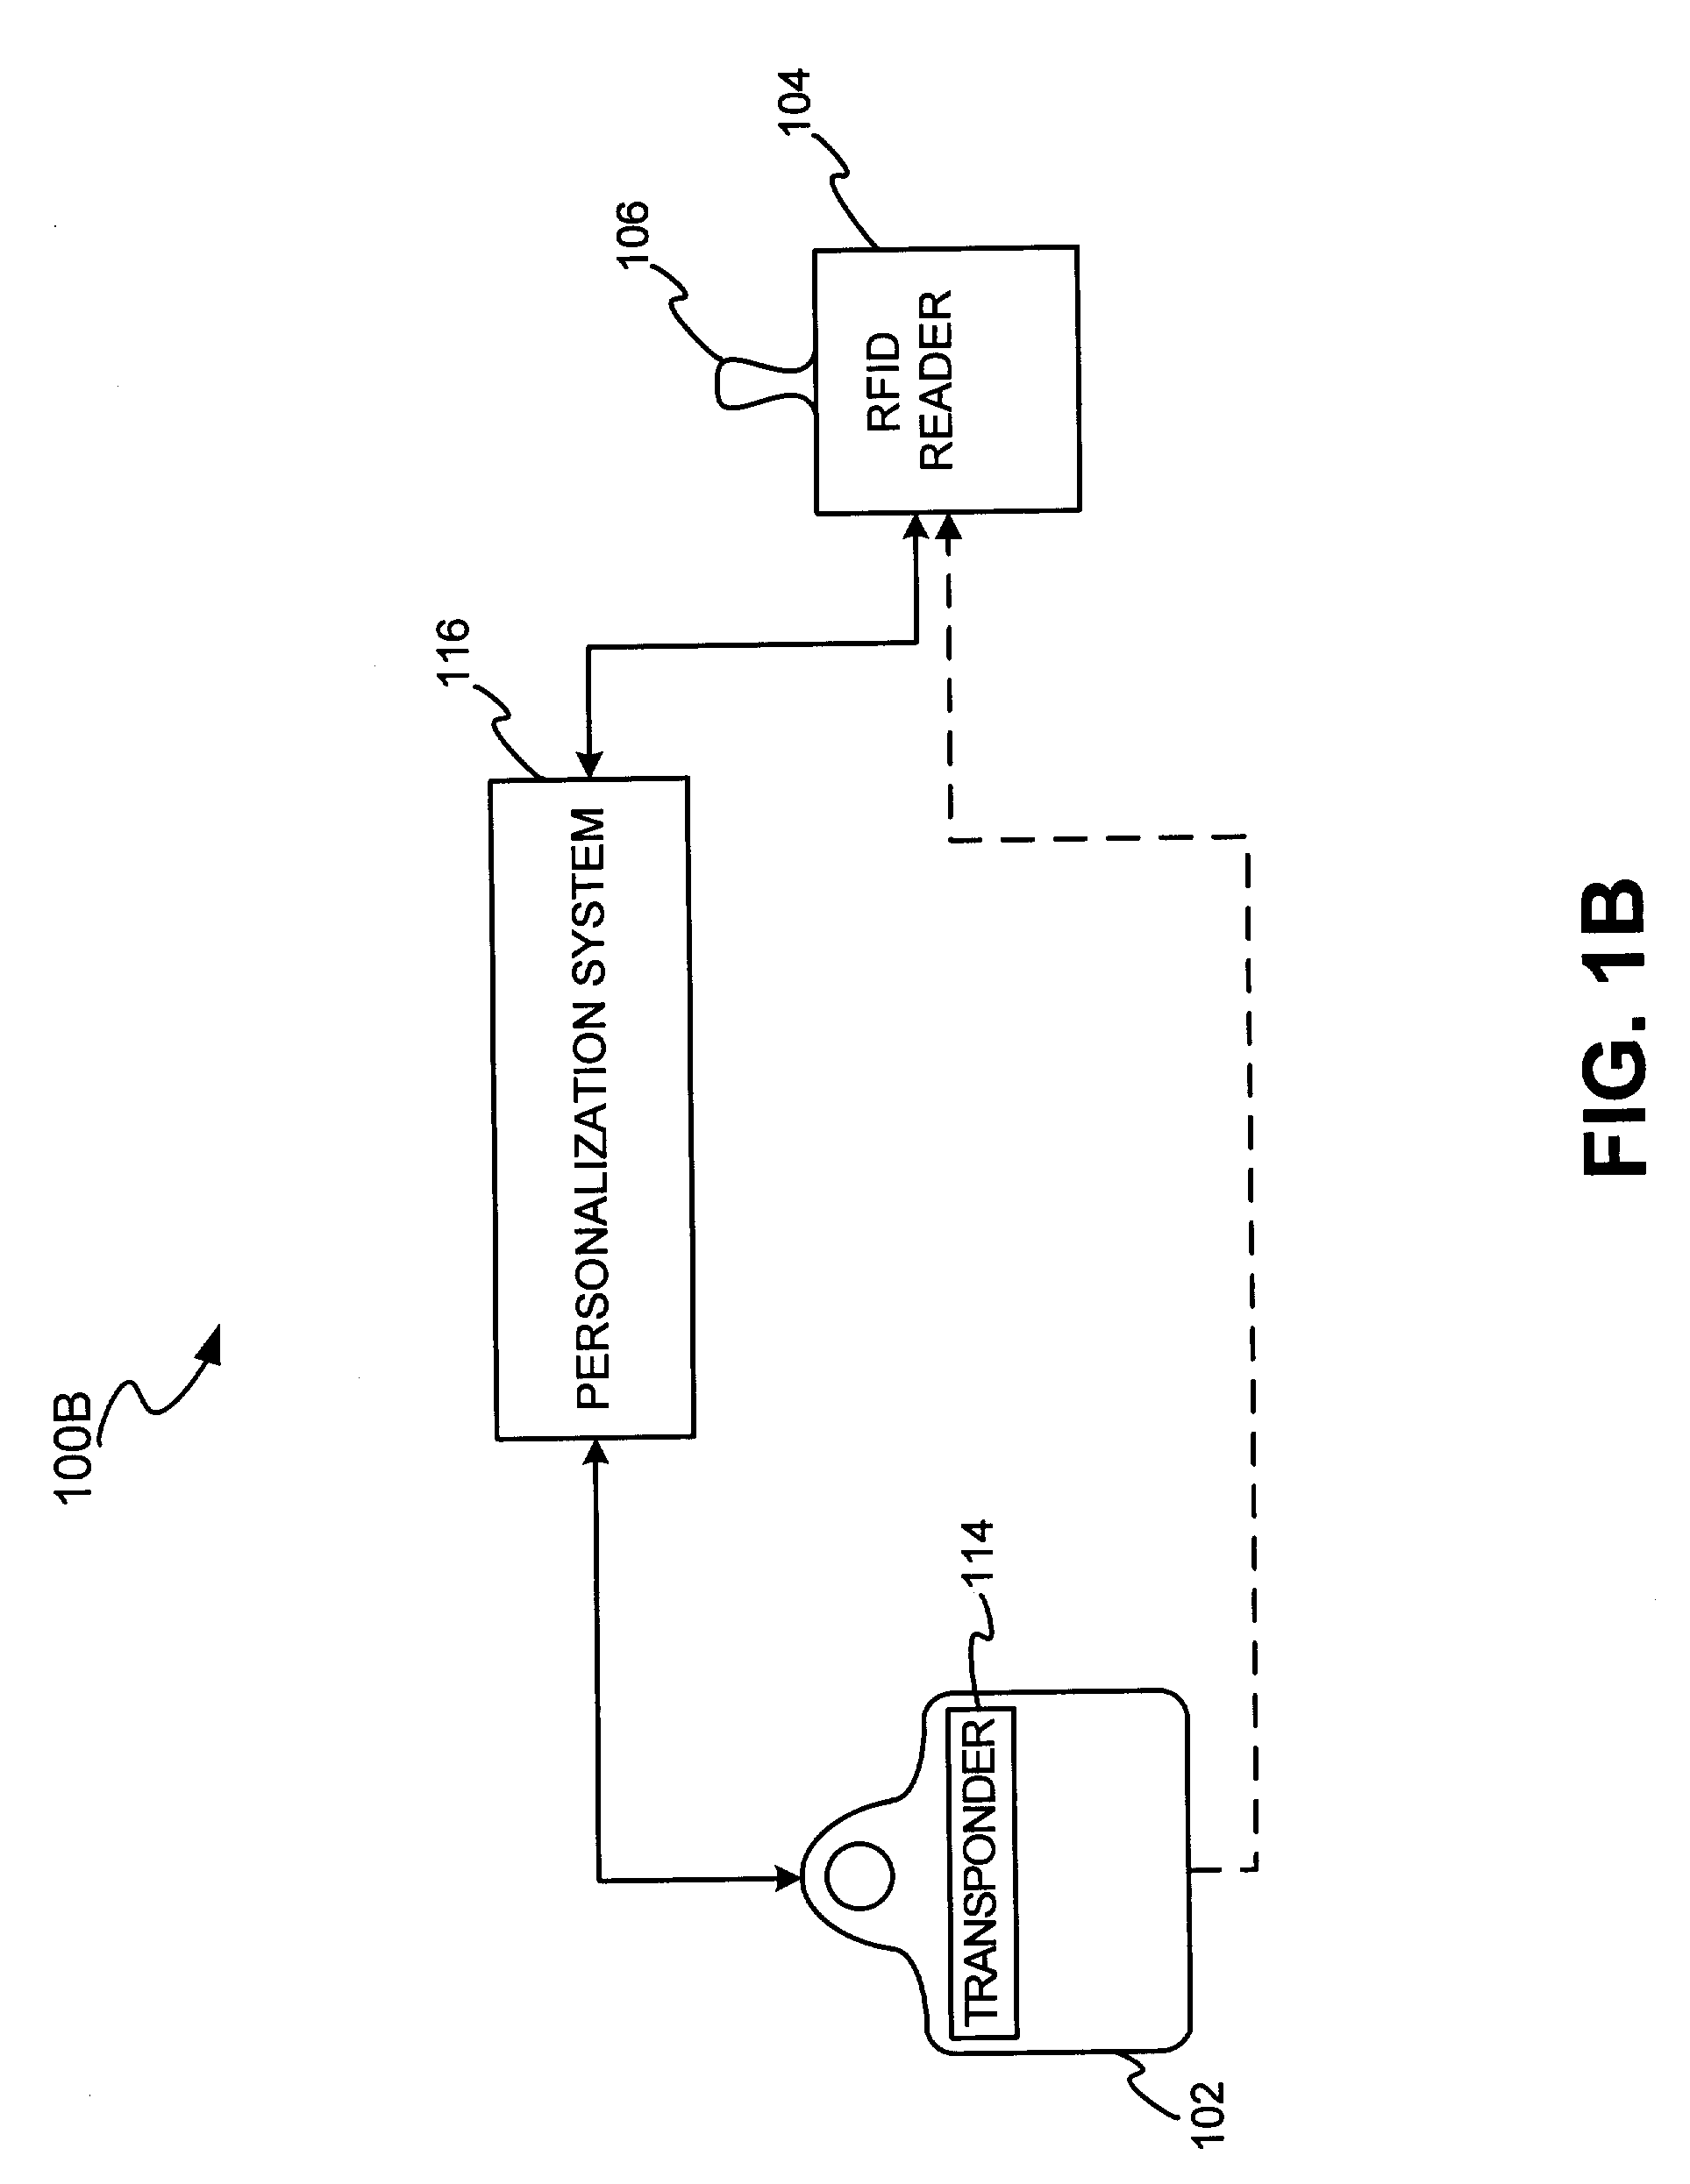 Method and system for DNA recognition biometrics on a fob